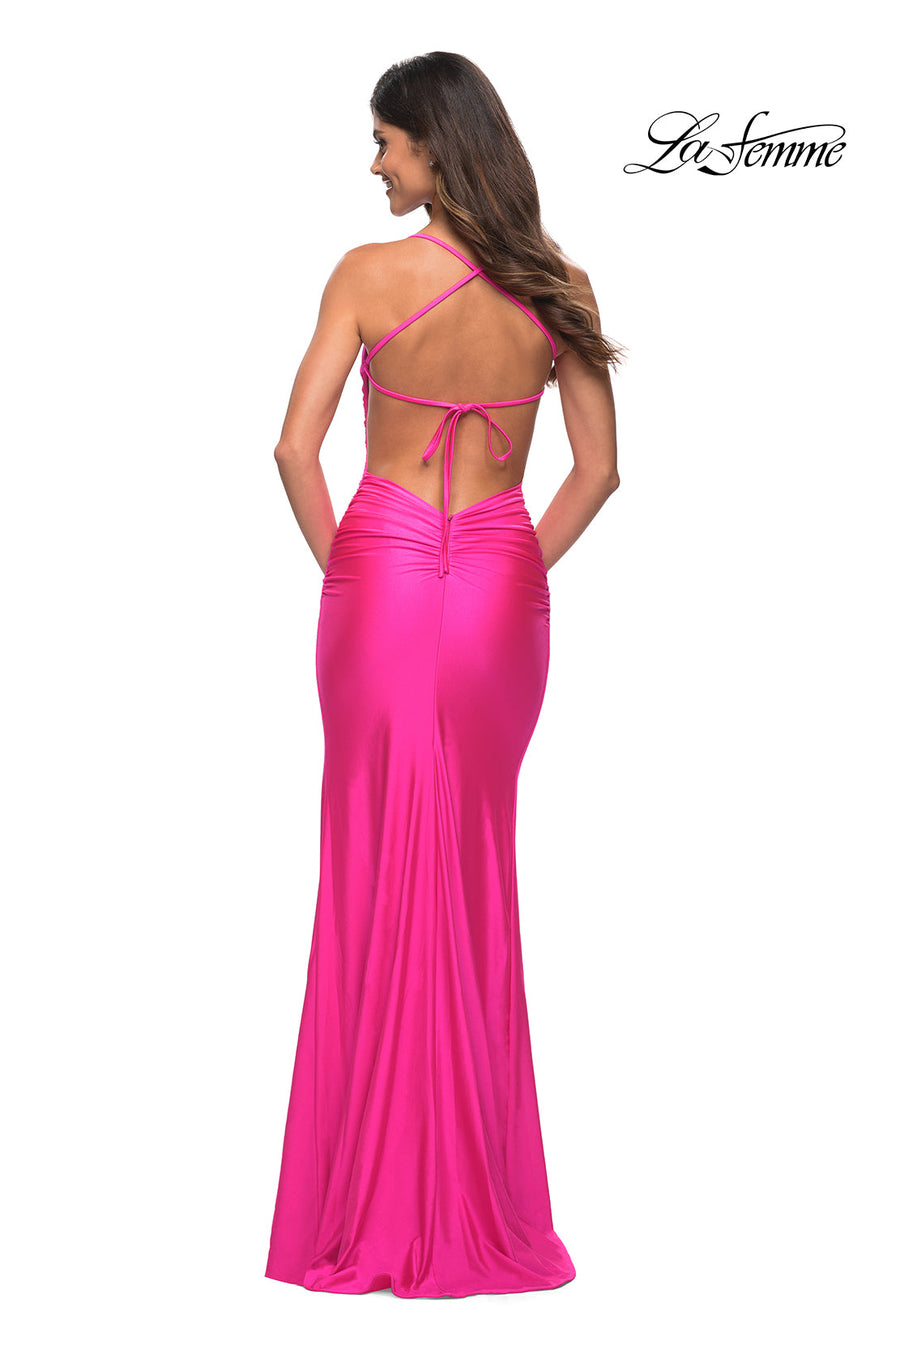 La Femme 30172 prom dress images.  La Femme 30172 is available in these colors: Neon Pink.